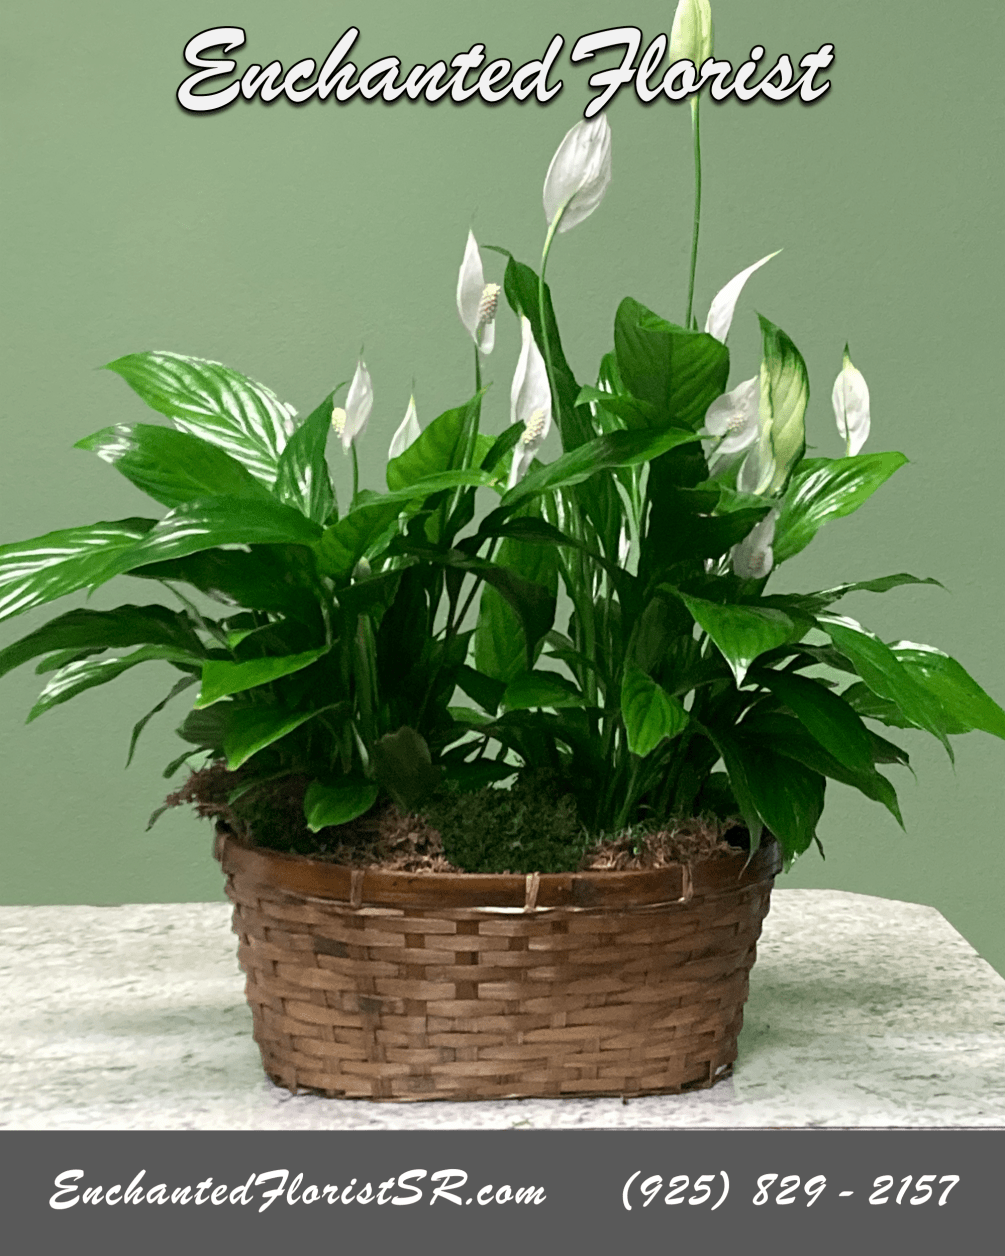 Spathiphyllum, also known as the Peace Lily, is known for both its